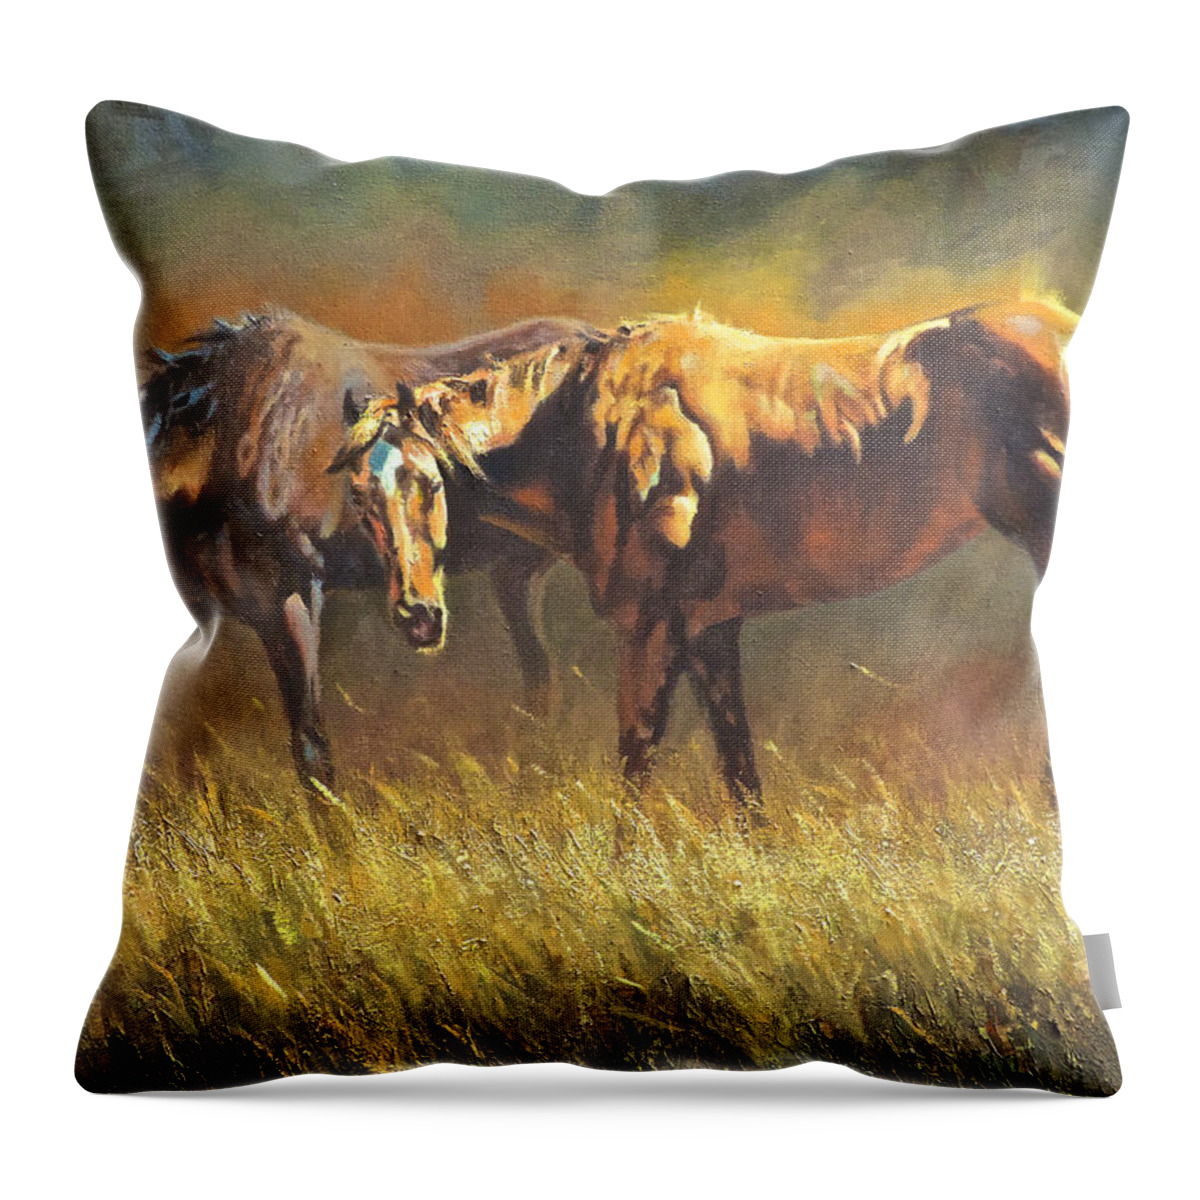 Horses Throw Pillow featuring the painting Sunkissed by Mia DeLode